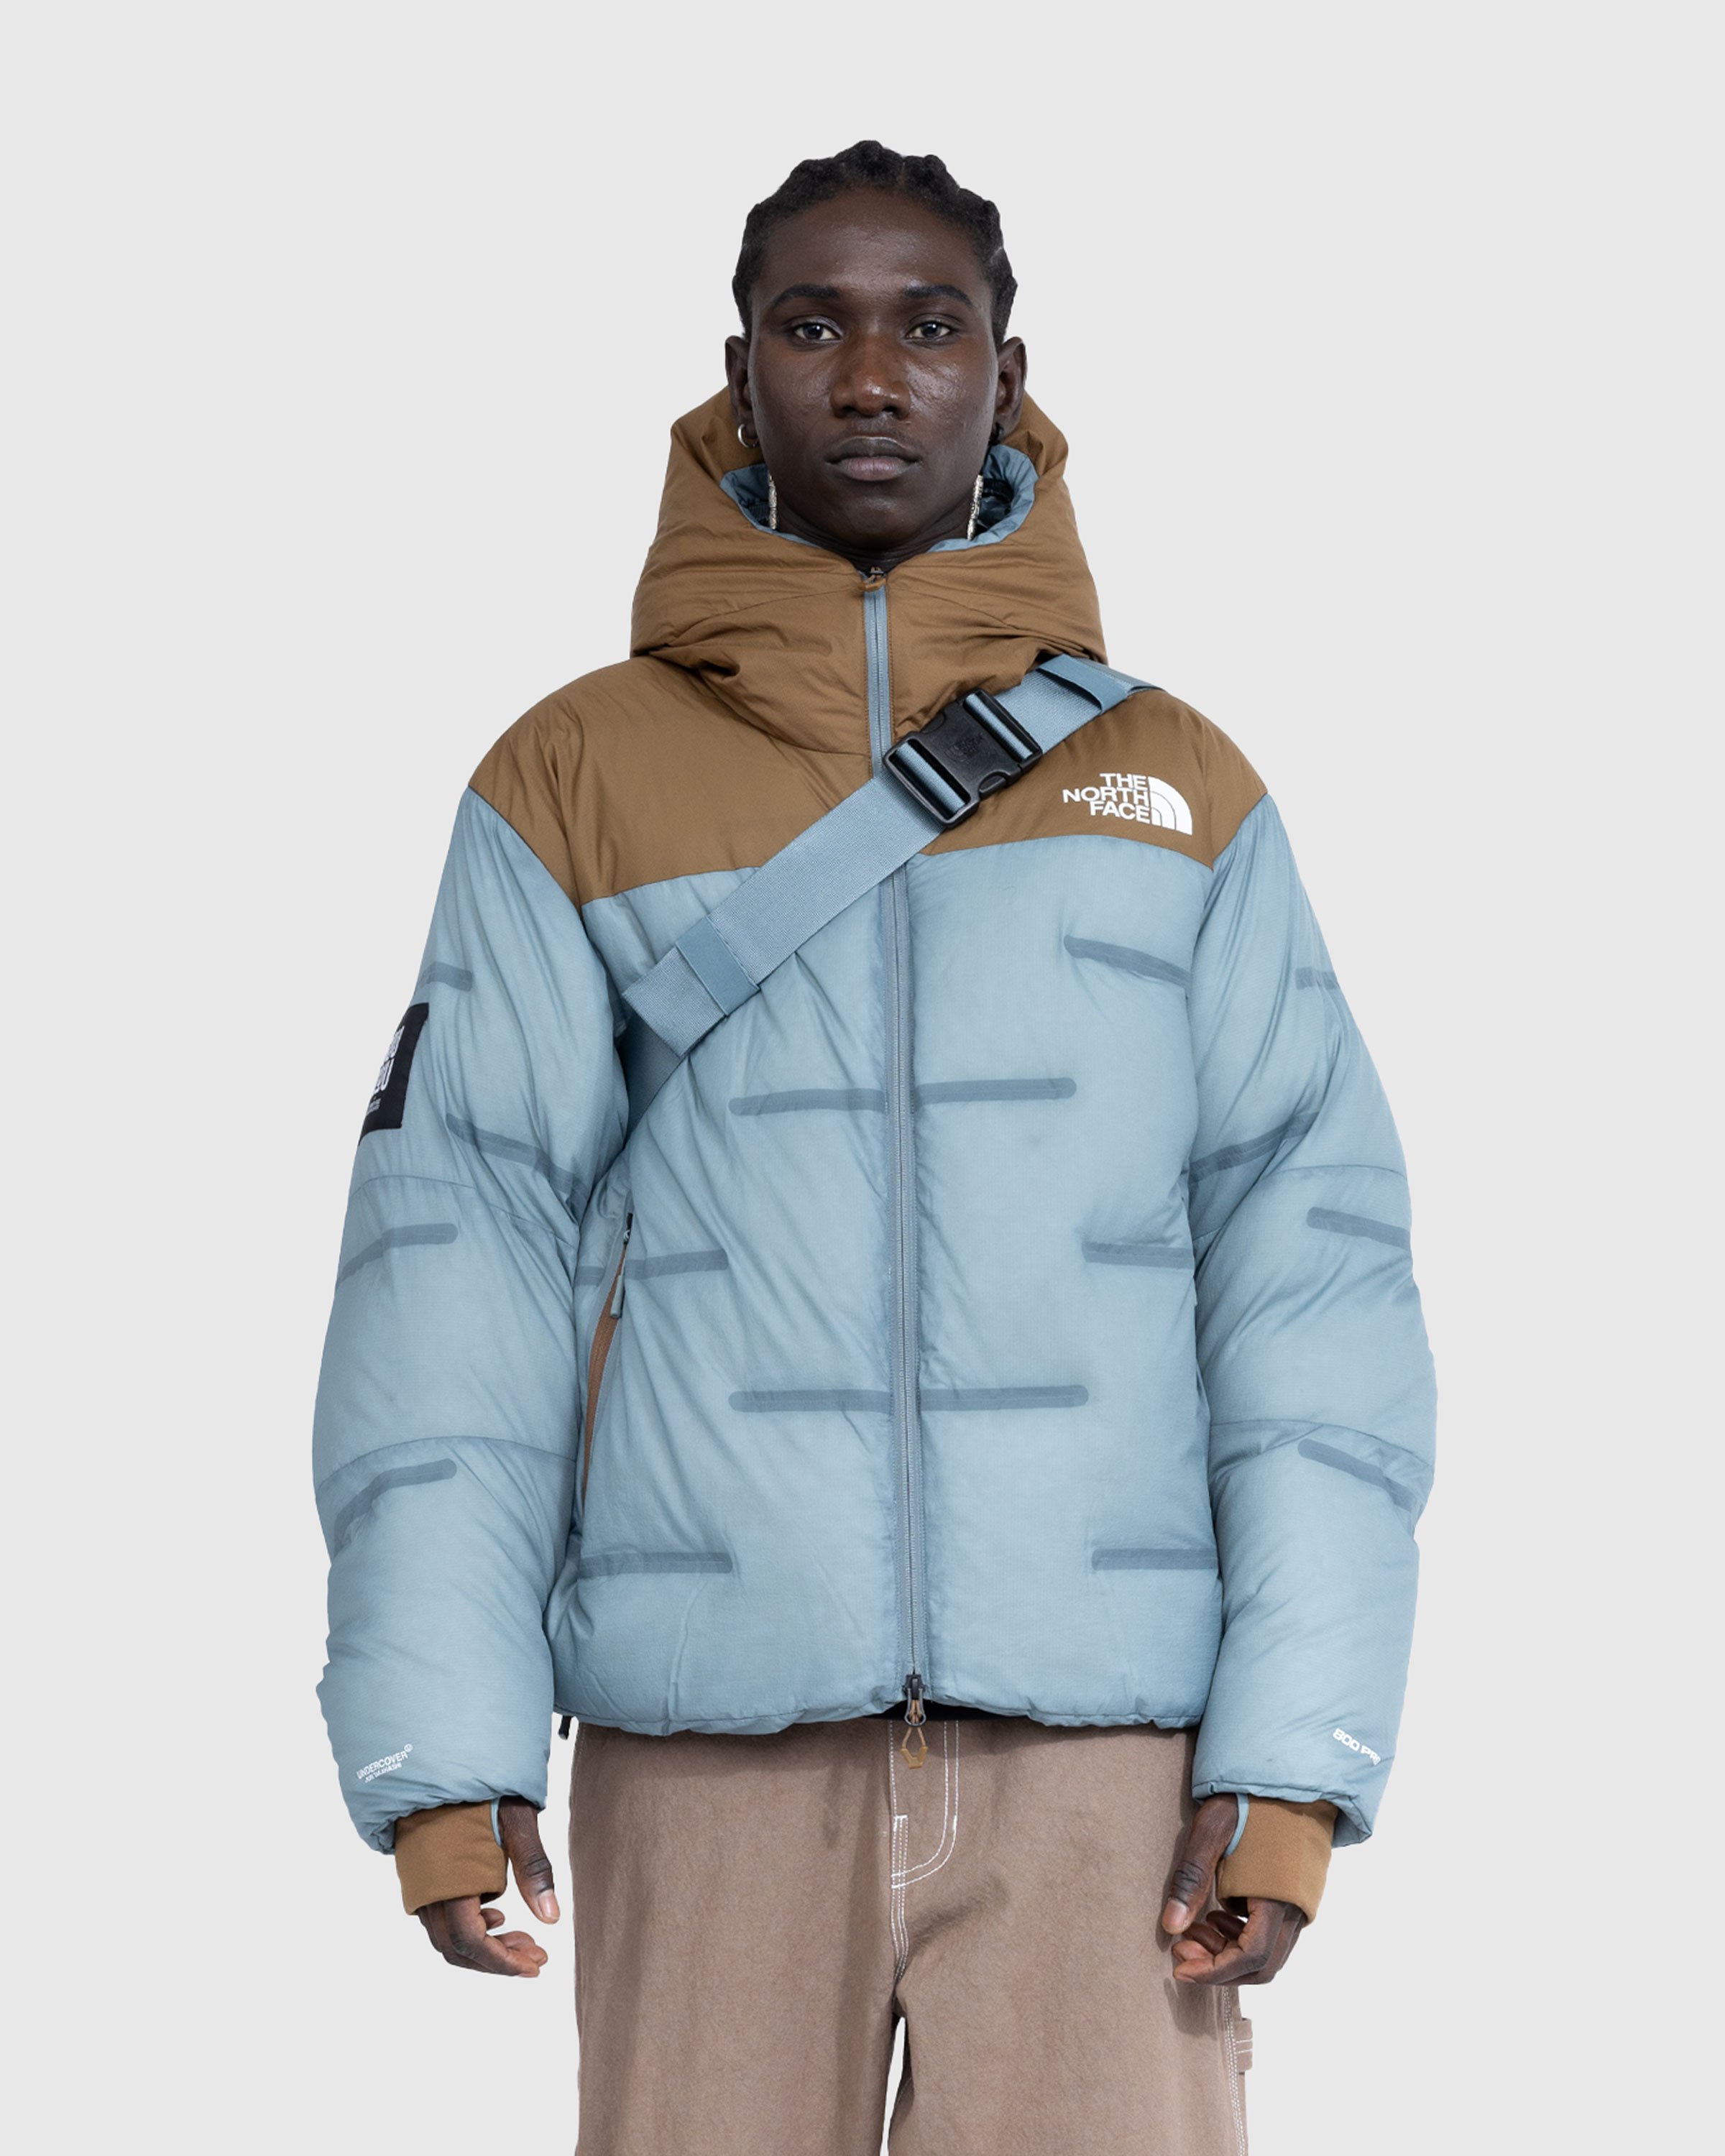 The North Face x UNDERCOVER - Soukuu Cloud Down Nupste Sepia Brown/Concrete Gray - Clothing - Multi - Image 3